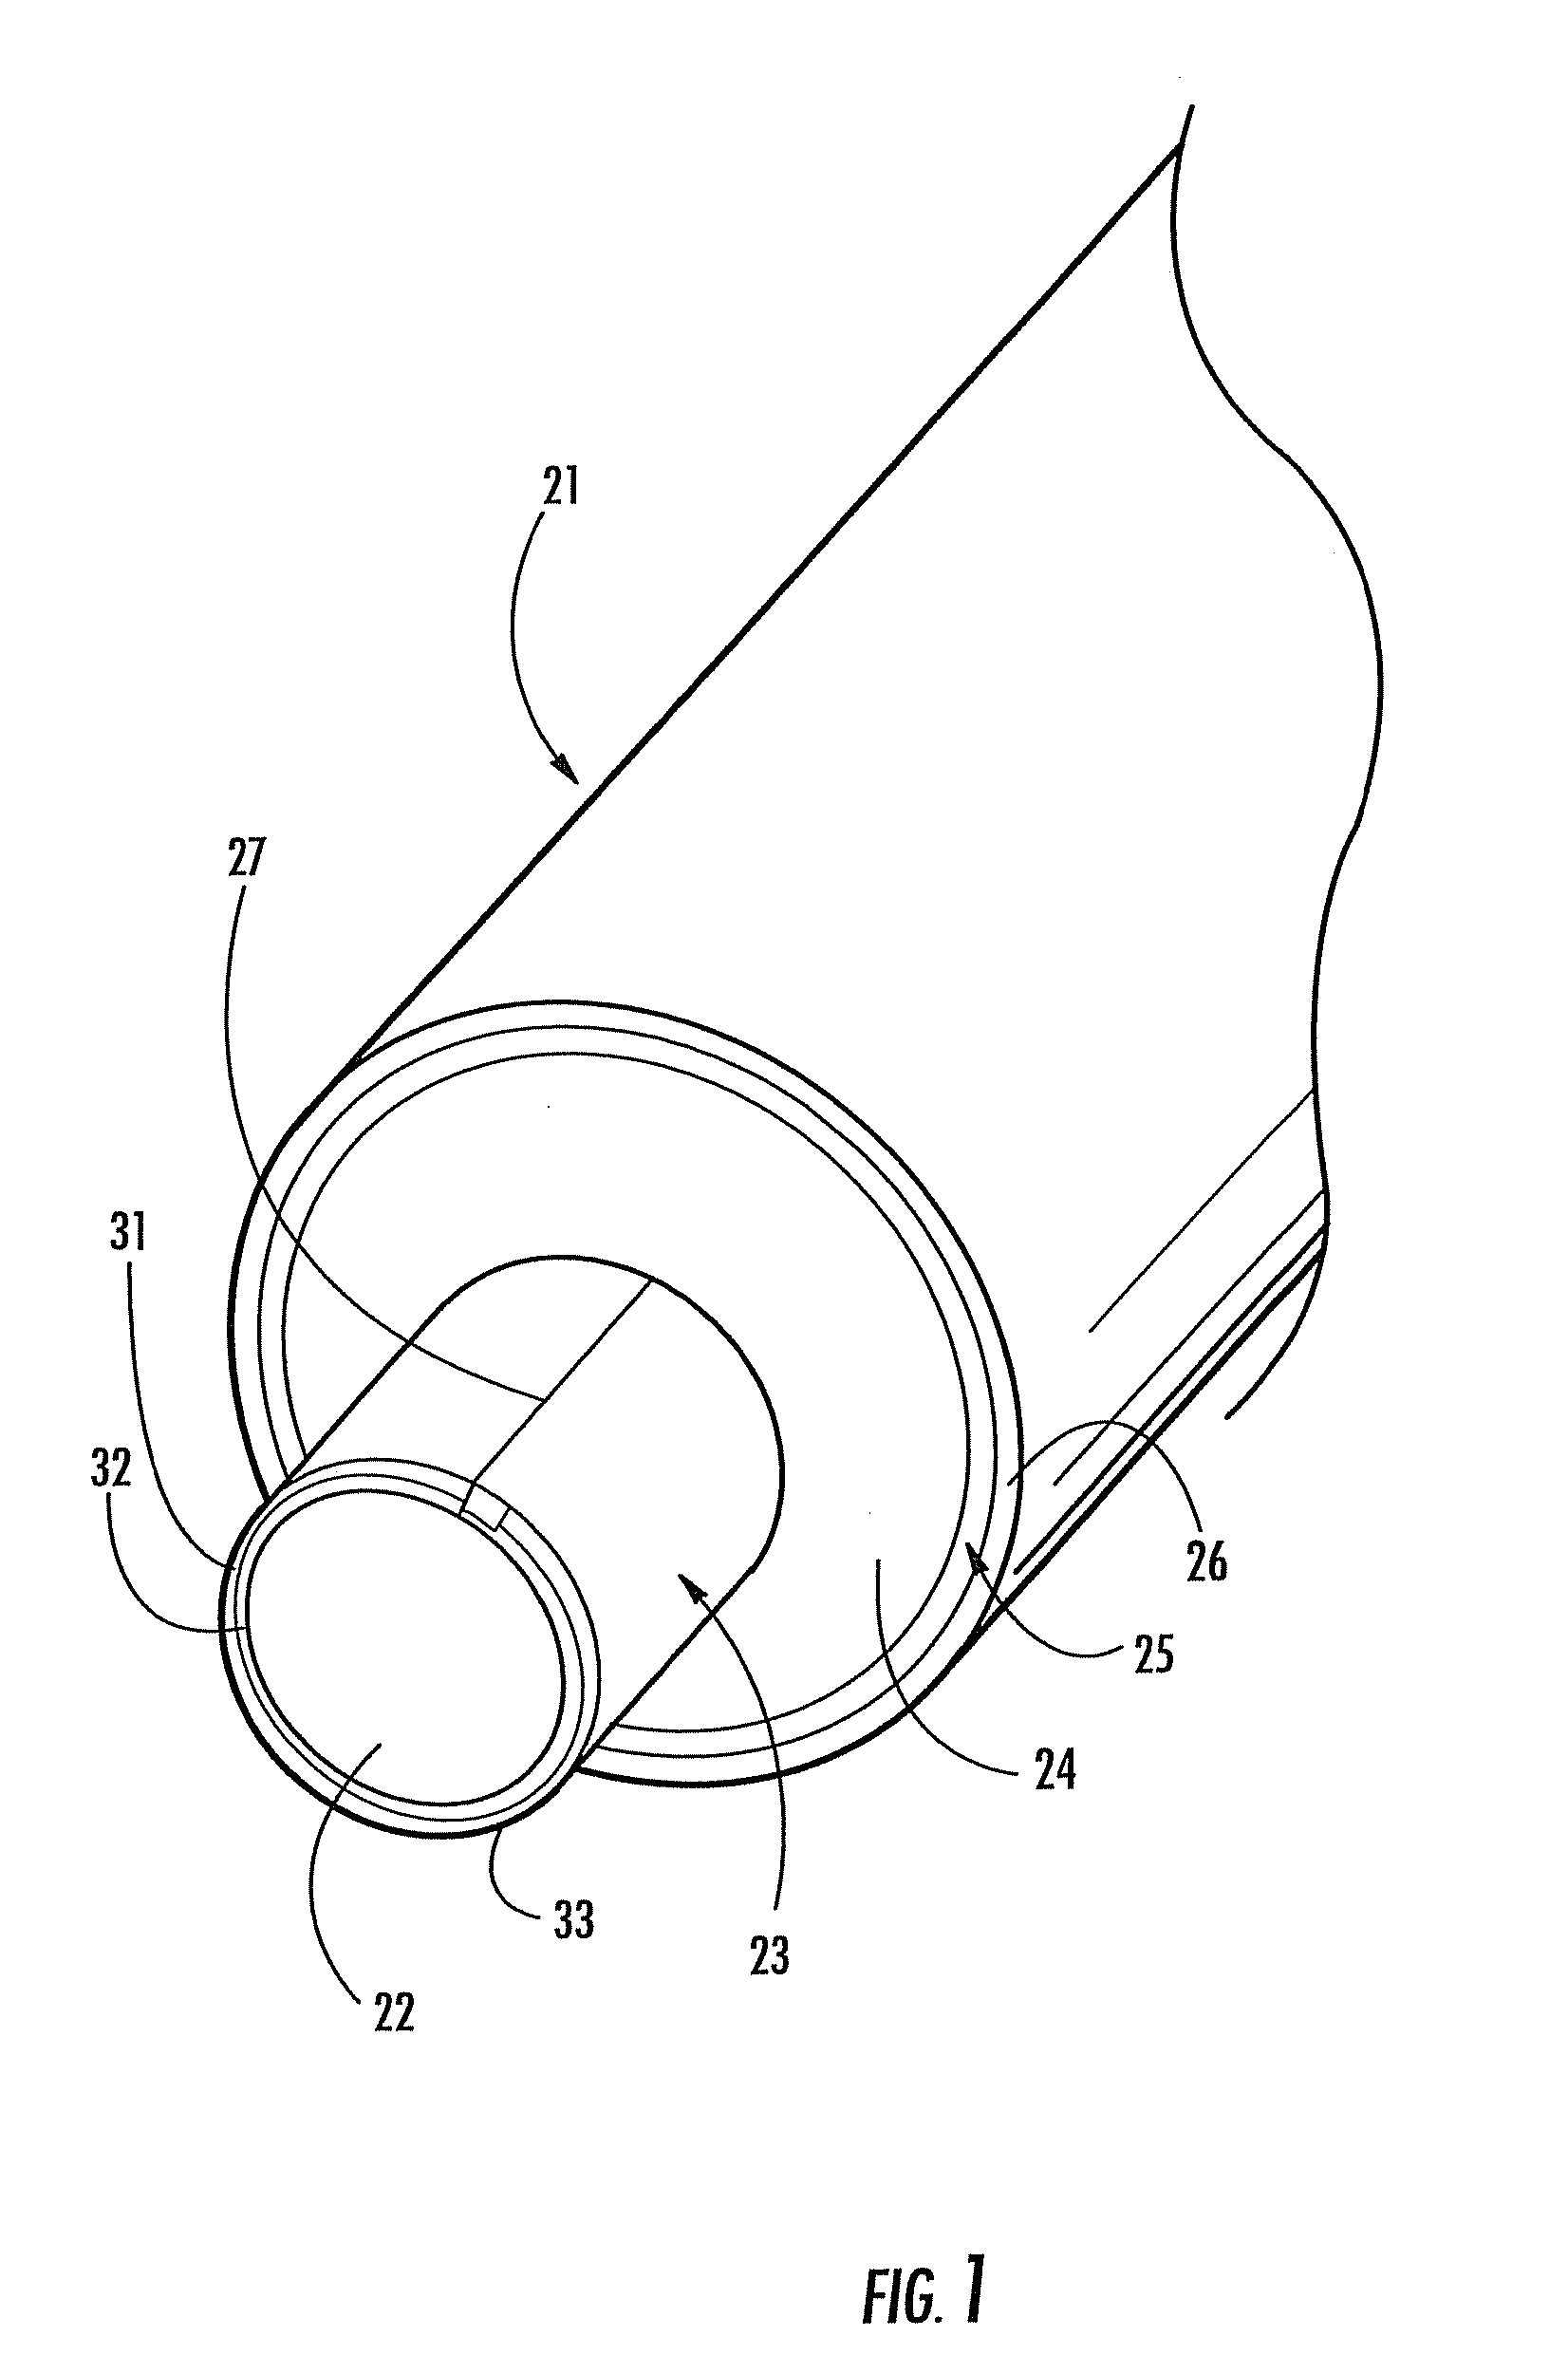 Method of making a coaxial cable including tubular bimetallic inner layer with folded over edge portions